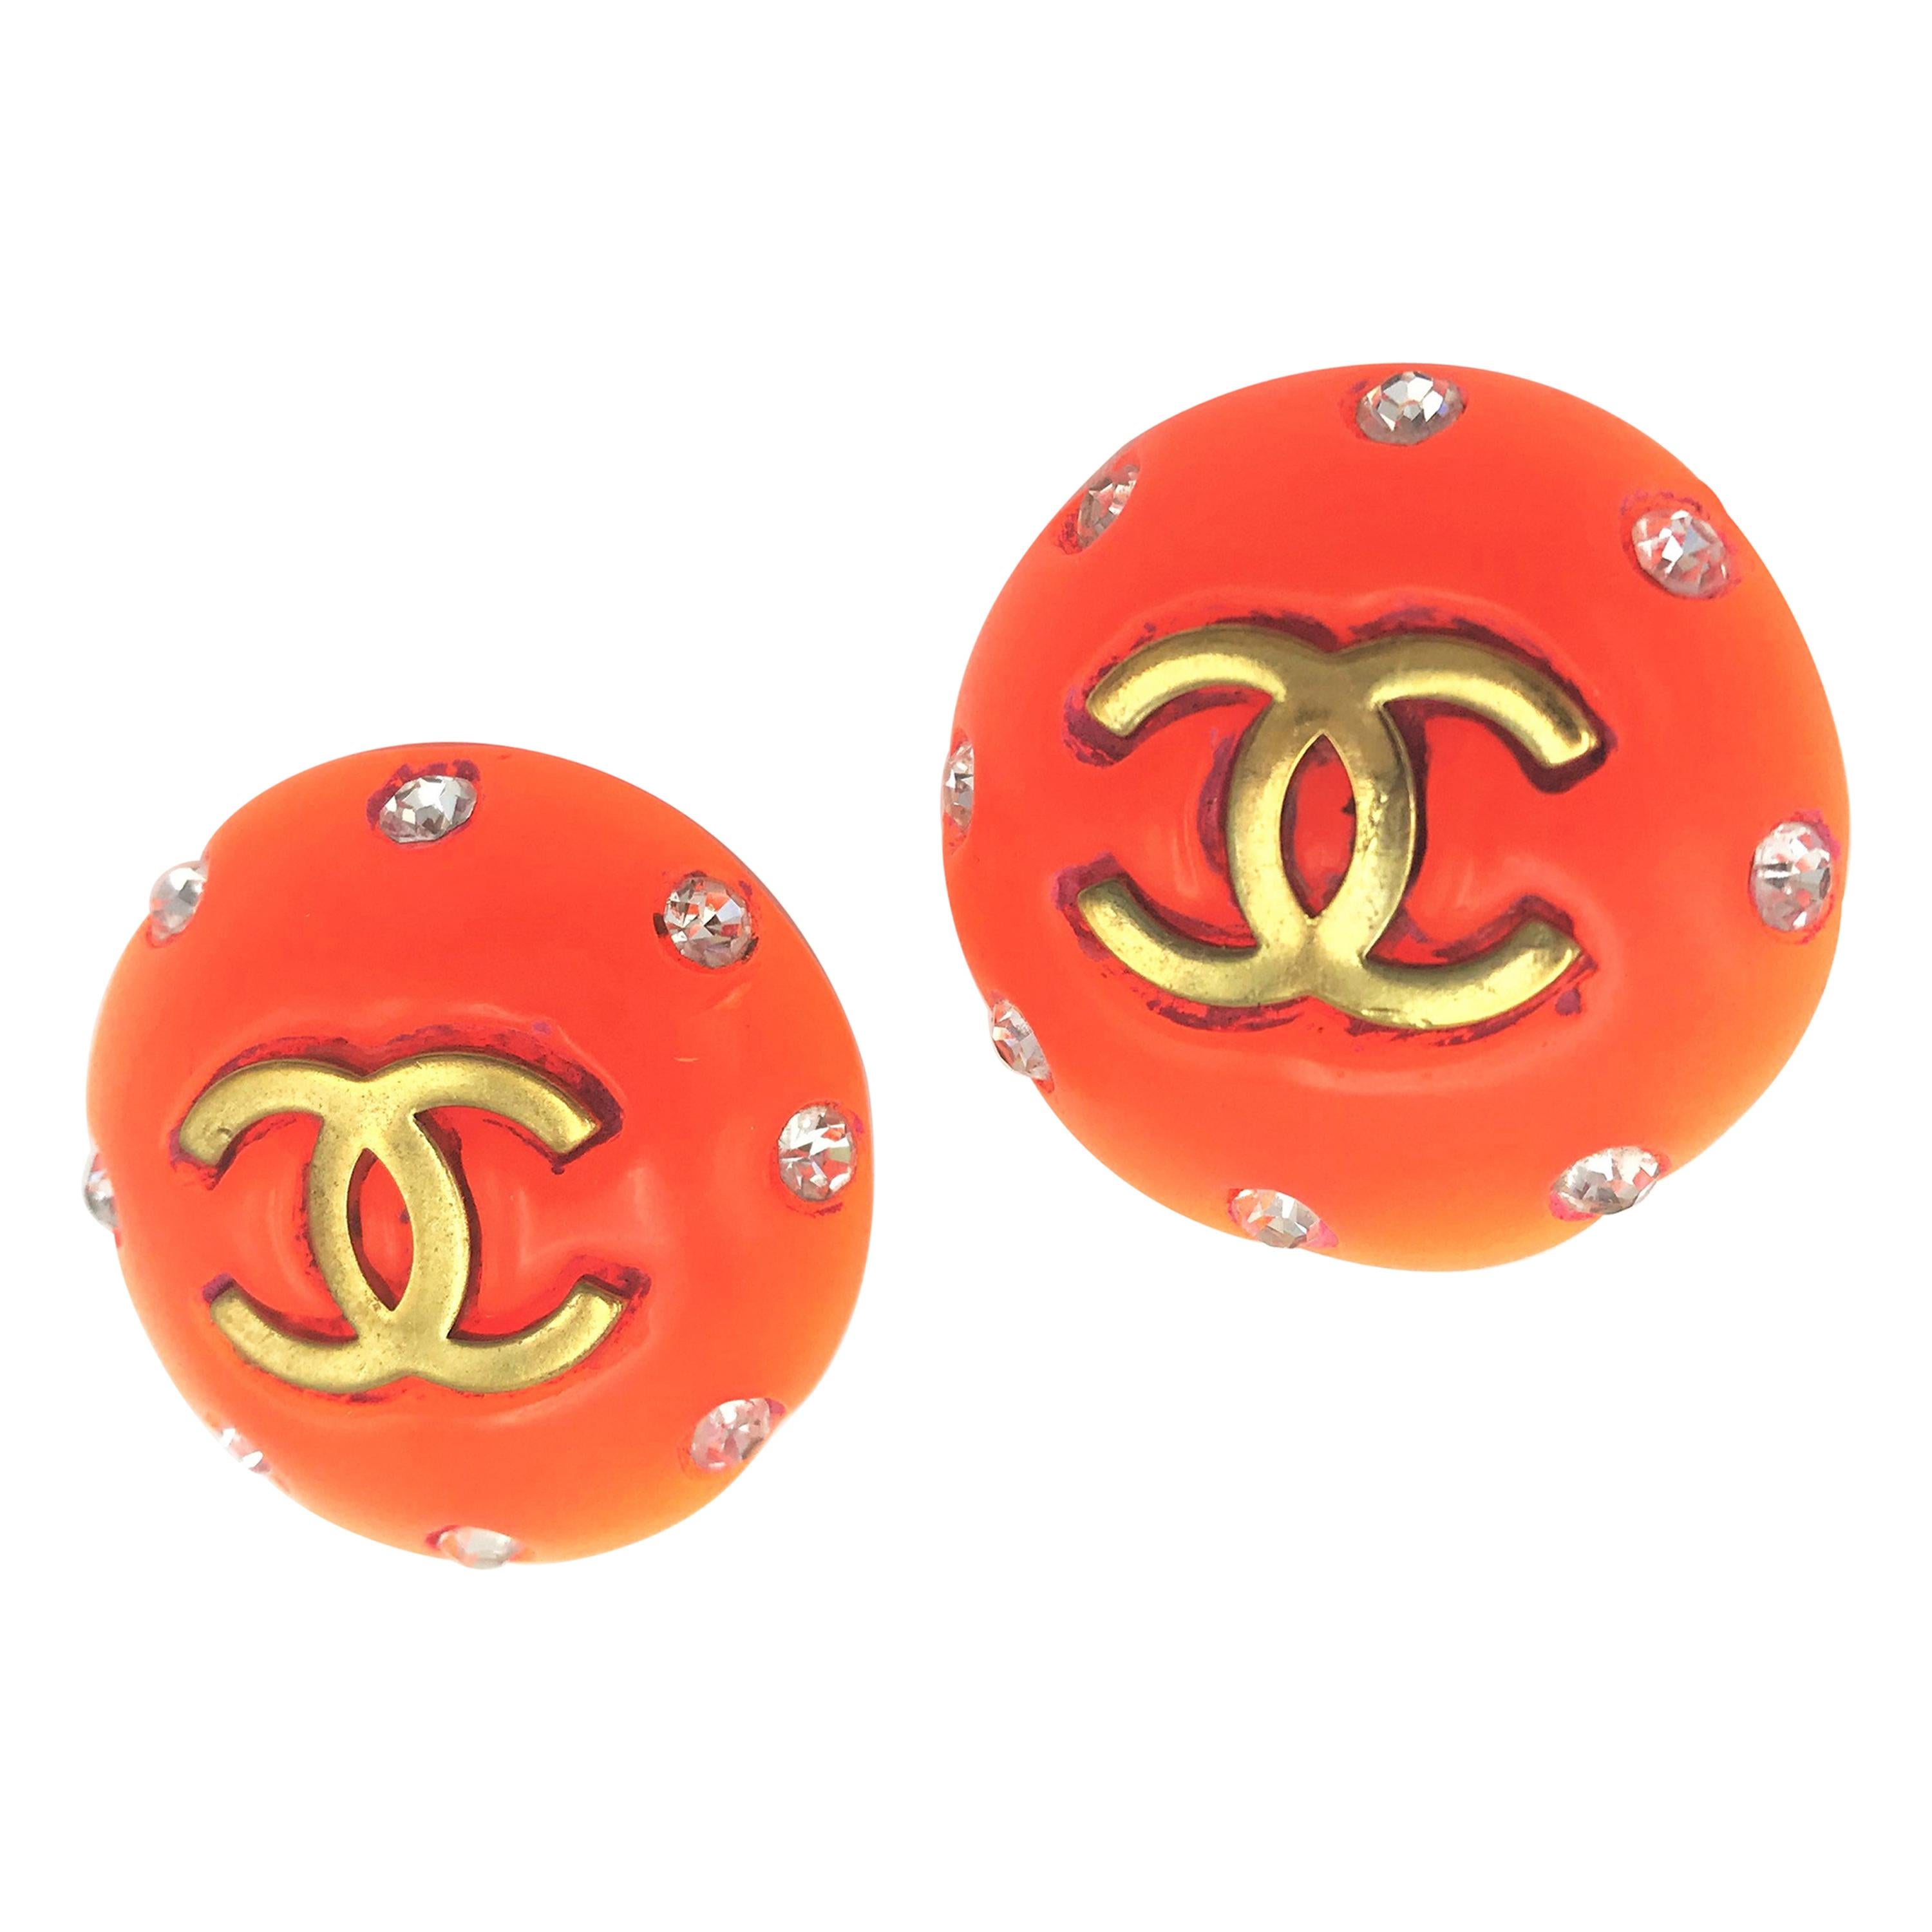 Chanel clip-on ear orange with CC signed 1995 P = Printemps - Spring 